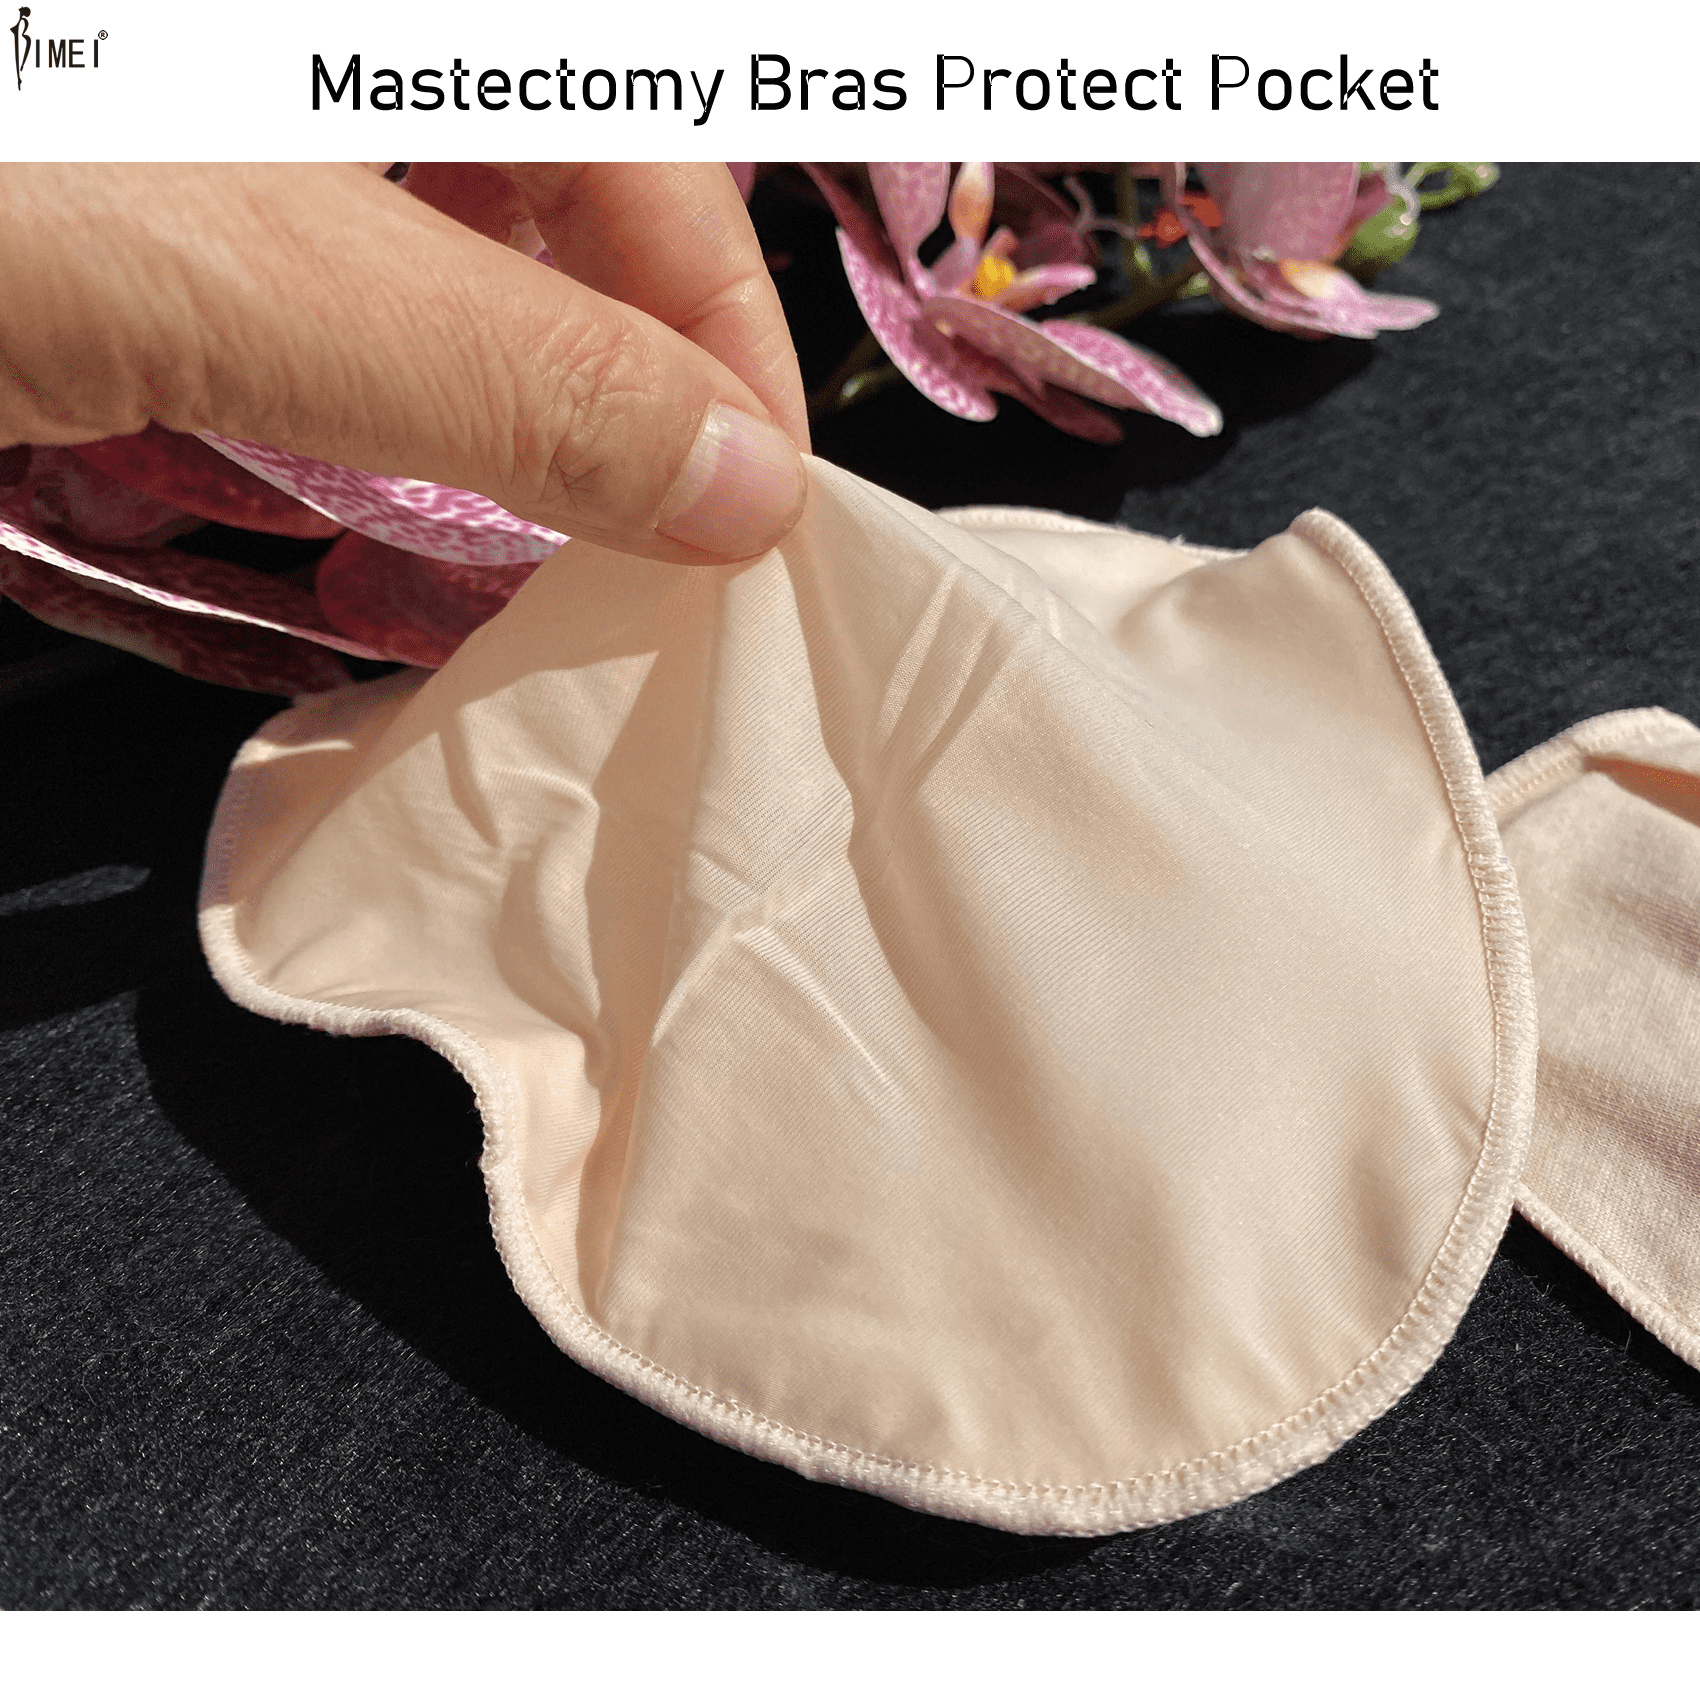 BIMEI Breathable Protect Pocket for Mastectomy Silicone Breast Forms Cover  Bags for Prosthesis Artificial Fake Boobs Triangular 1 Pair ,Beige,S 